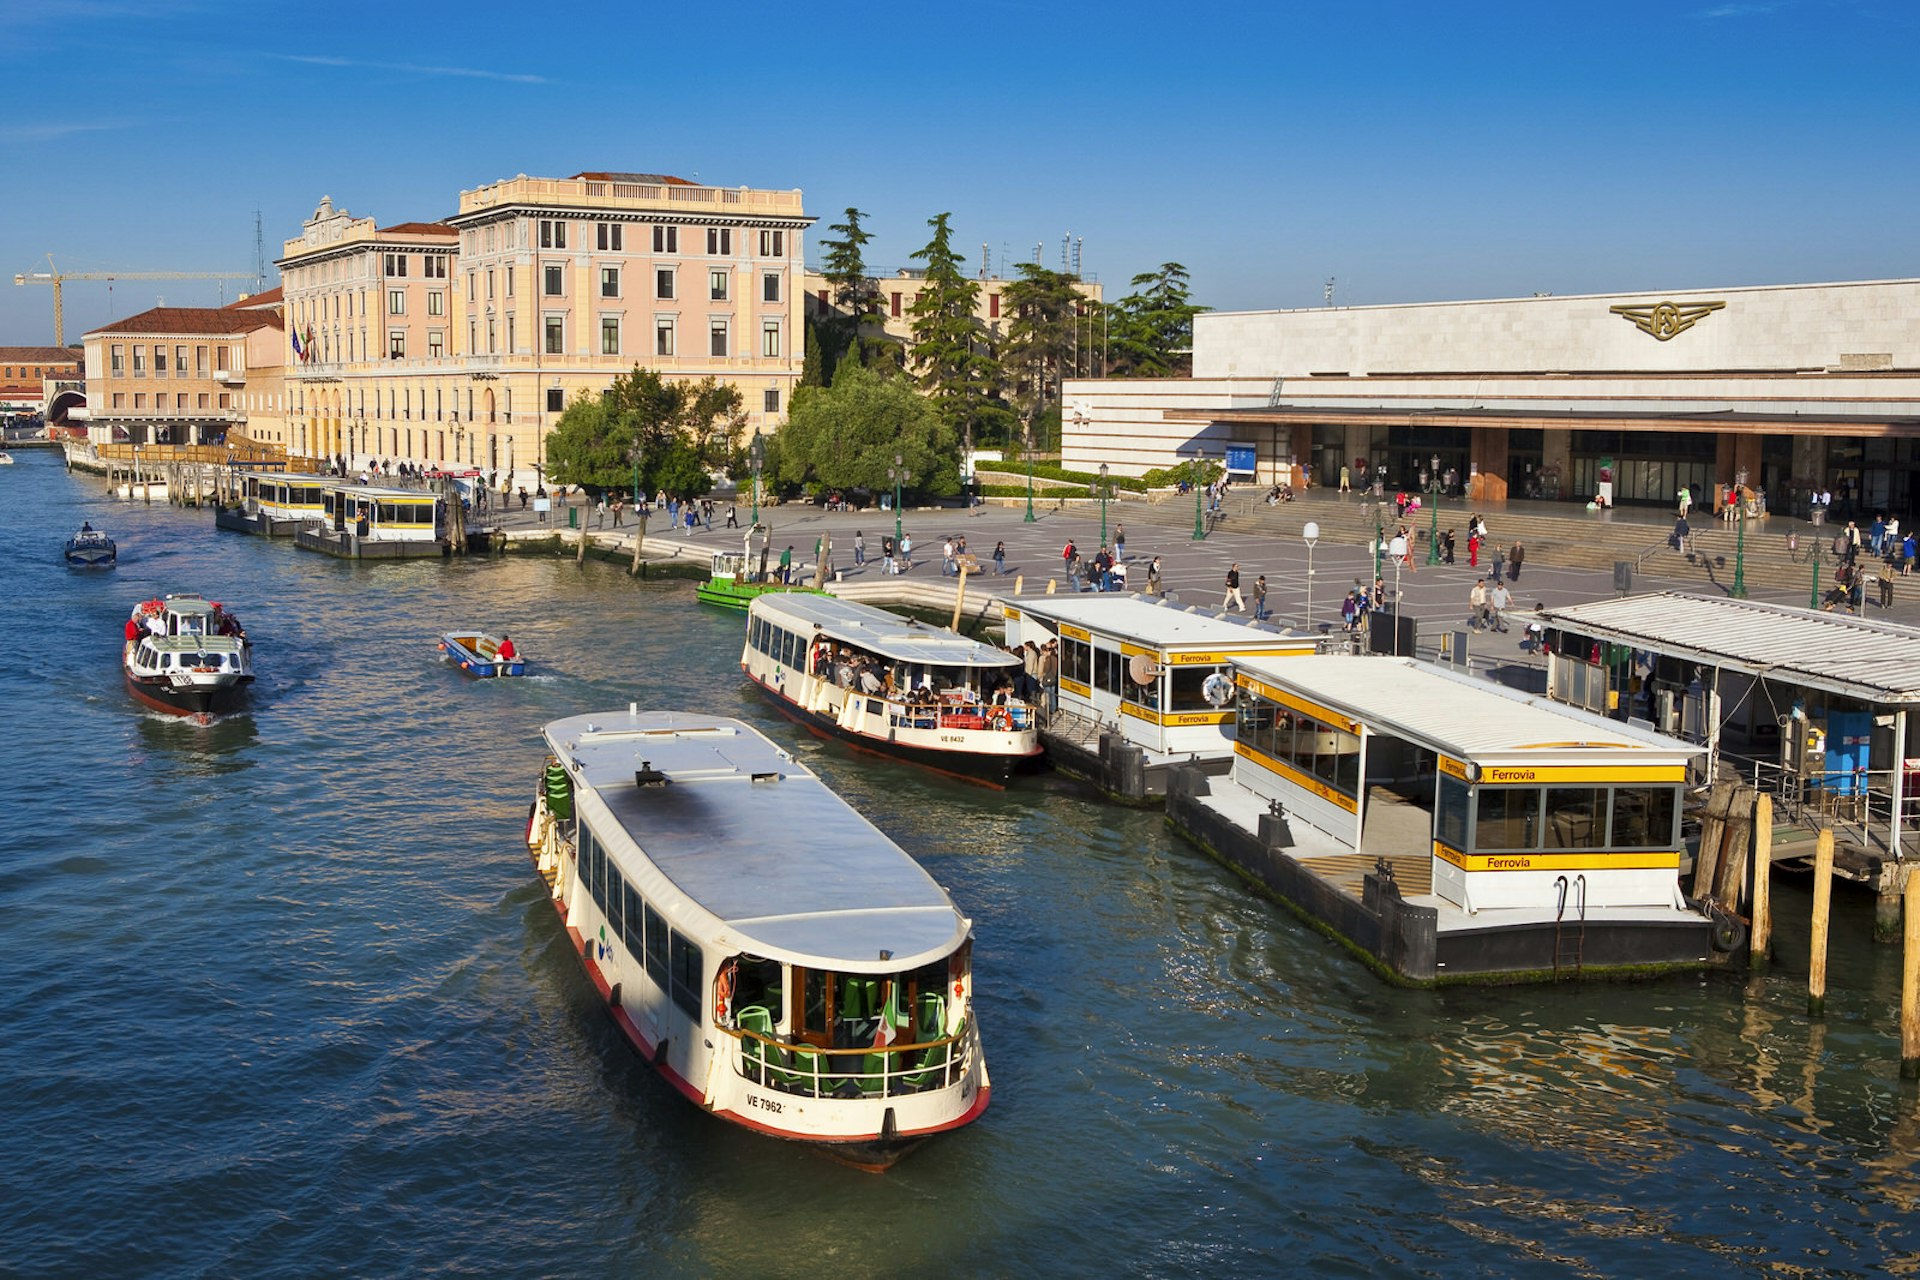 Venice's Santa Lucia station is right on the Grand Canal